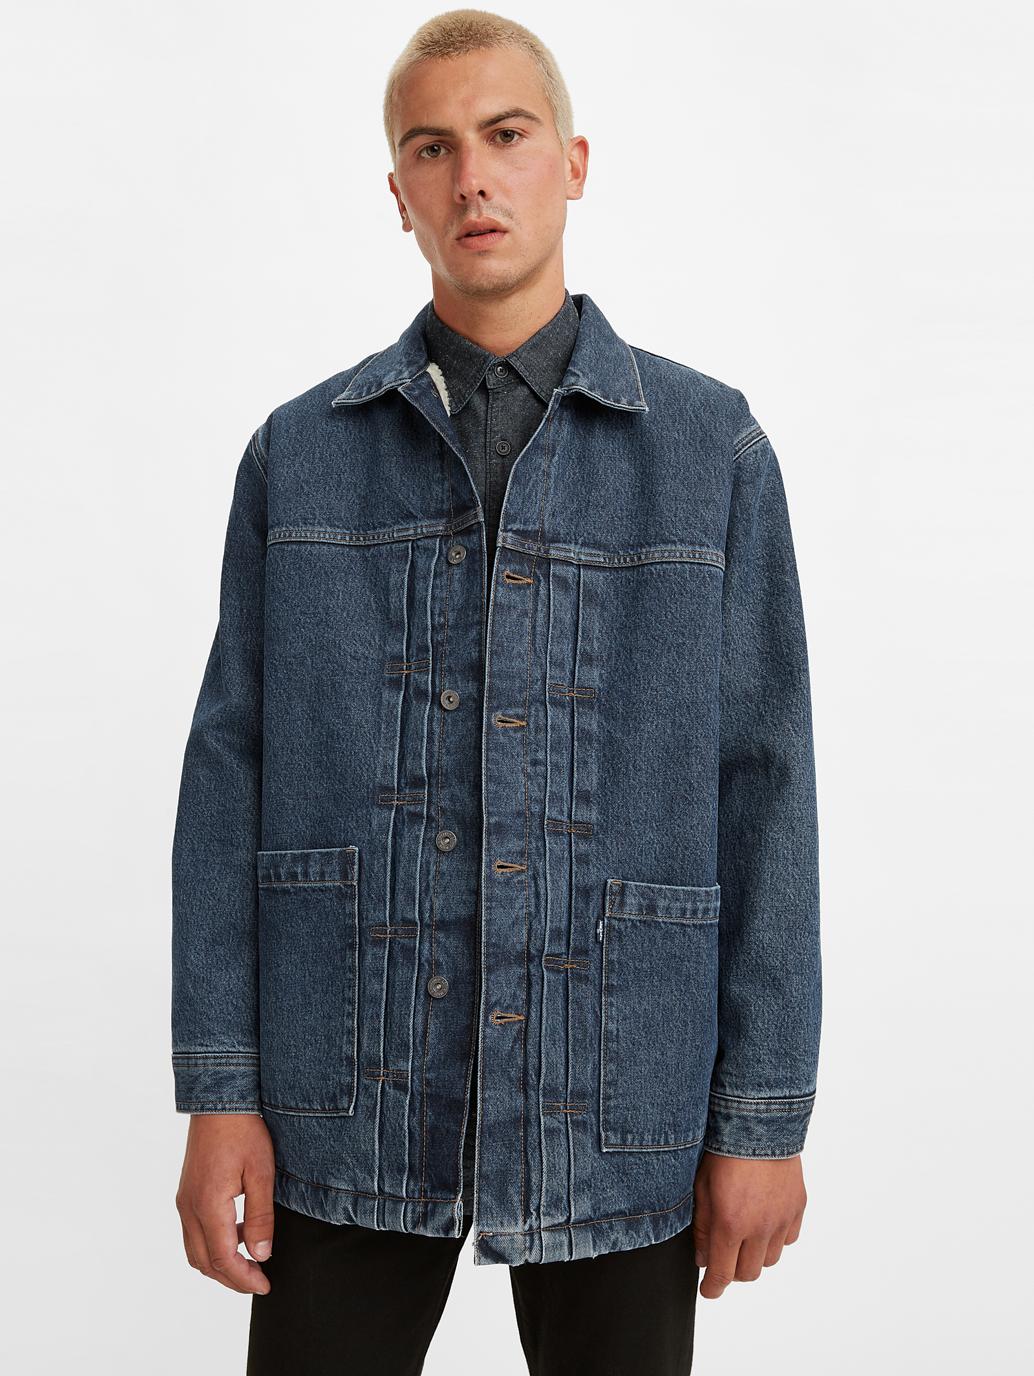 Buy Levi's® Made & Crafted® Men's Slouchy Type ii Trucker Jacket | Levi ...